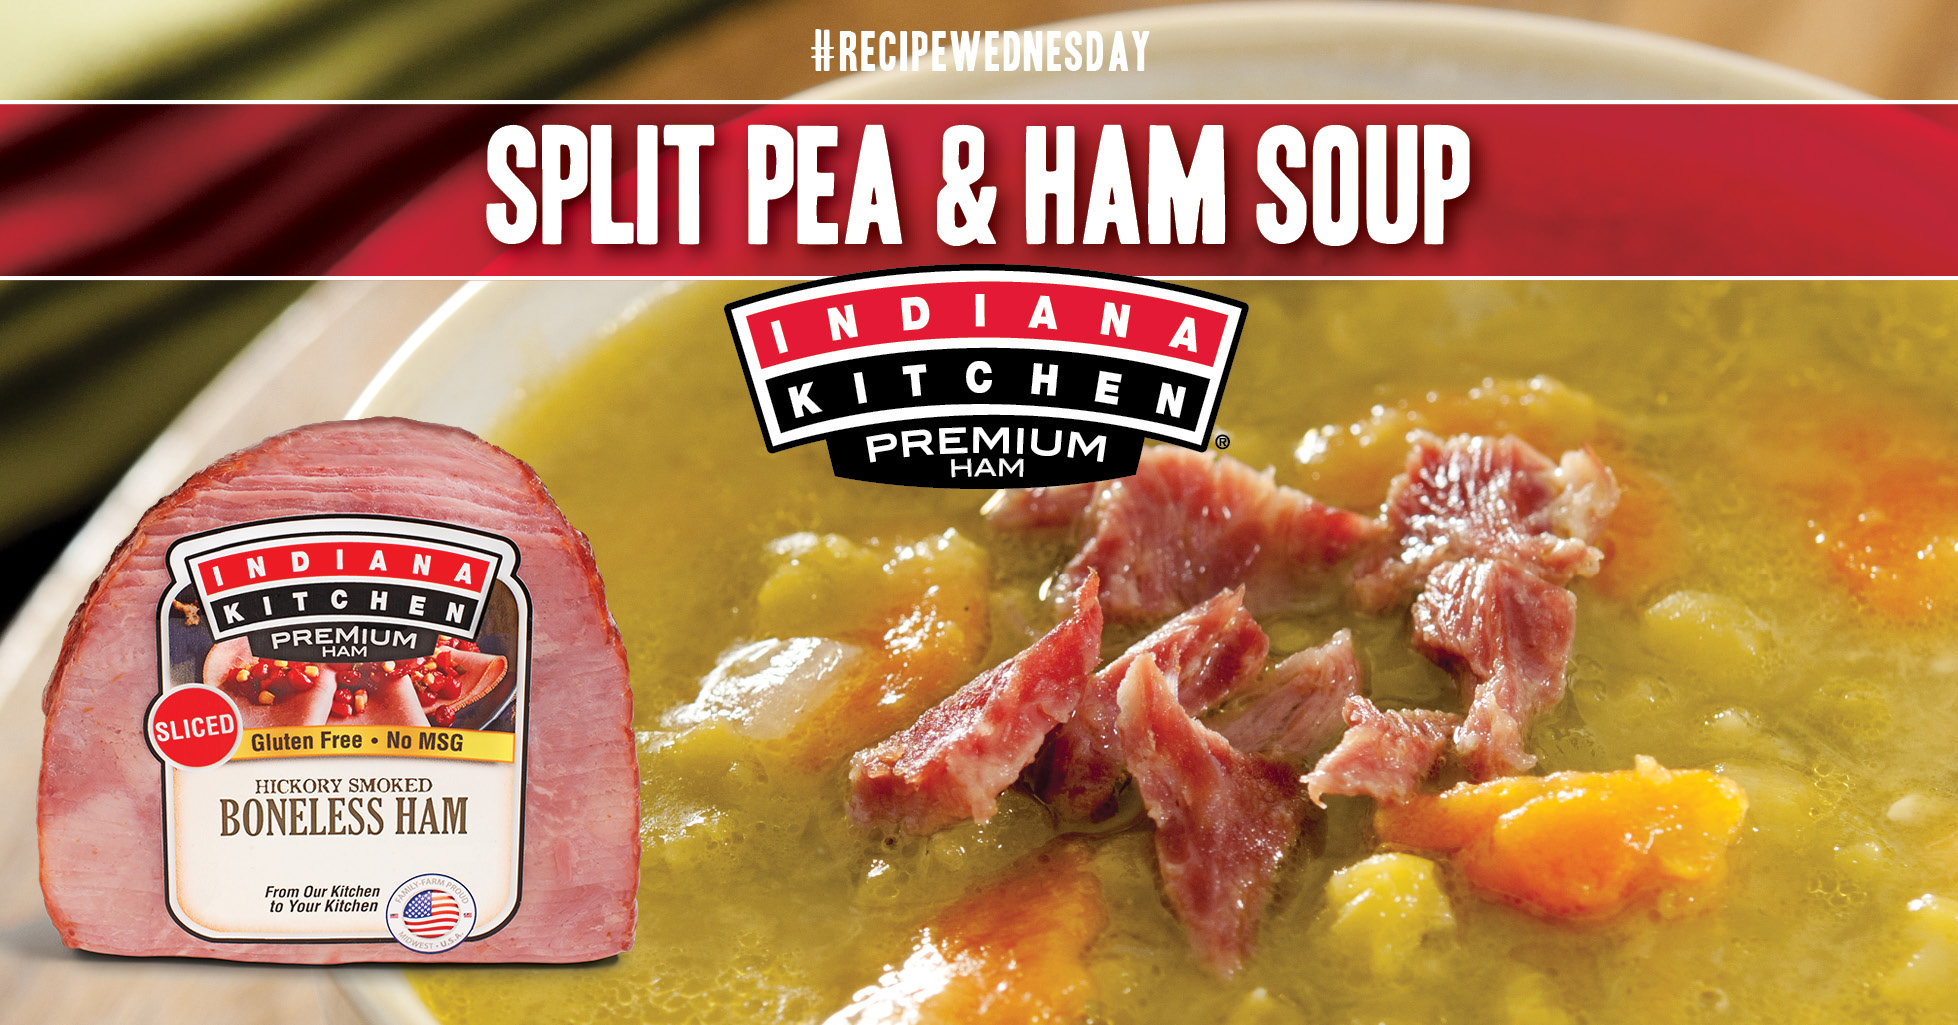 Hearty Split Pea Soup Featuring Indiana Kitchen Ham! A Perfect Recipe for Using Leftover Ham from the Holidays.